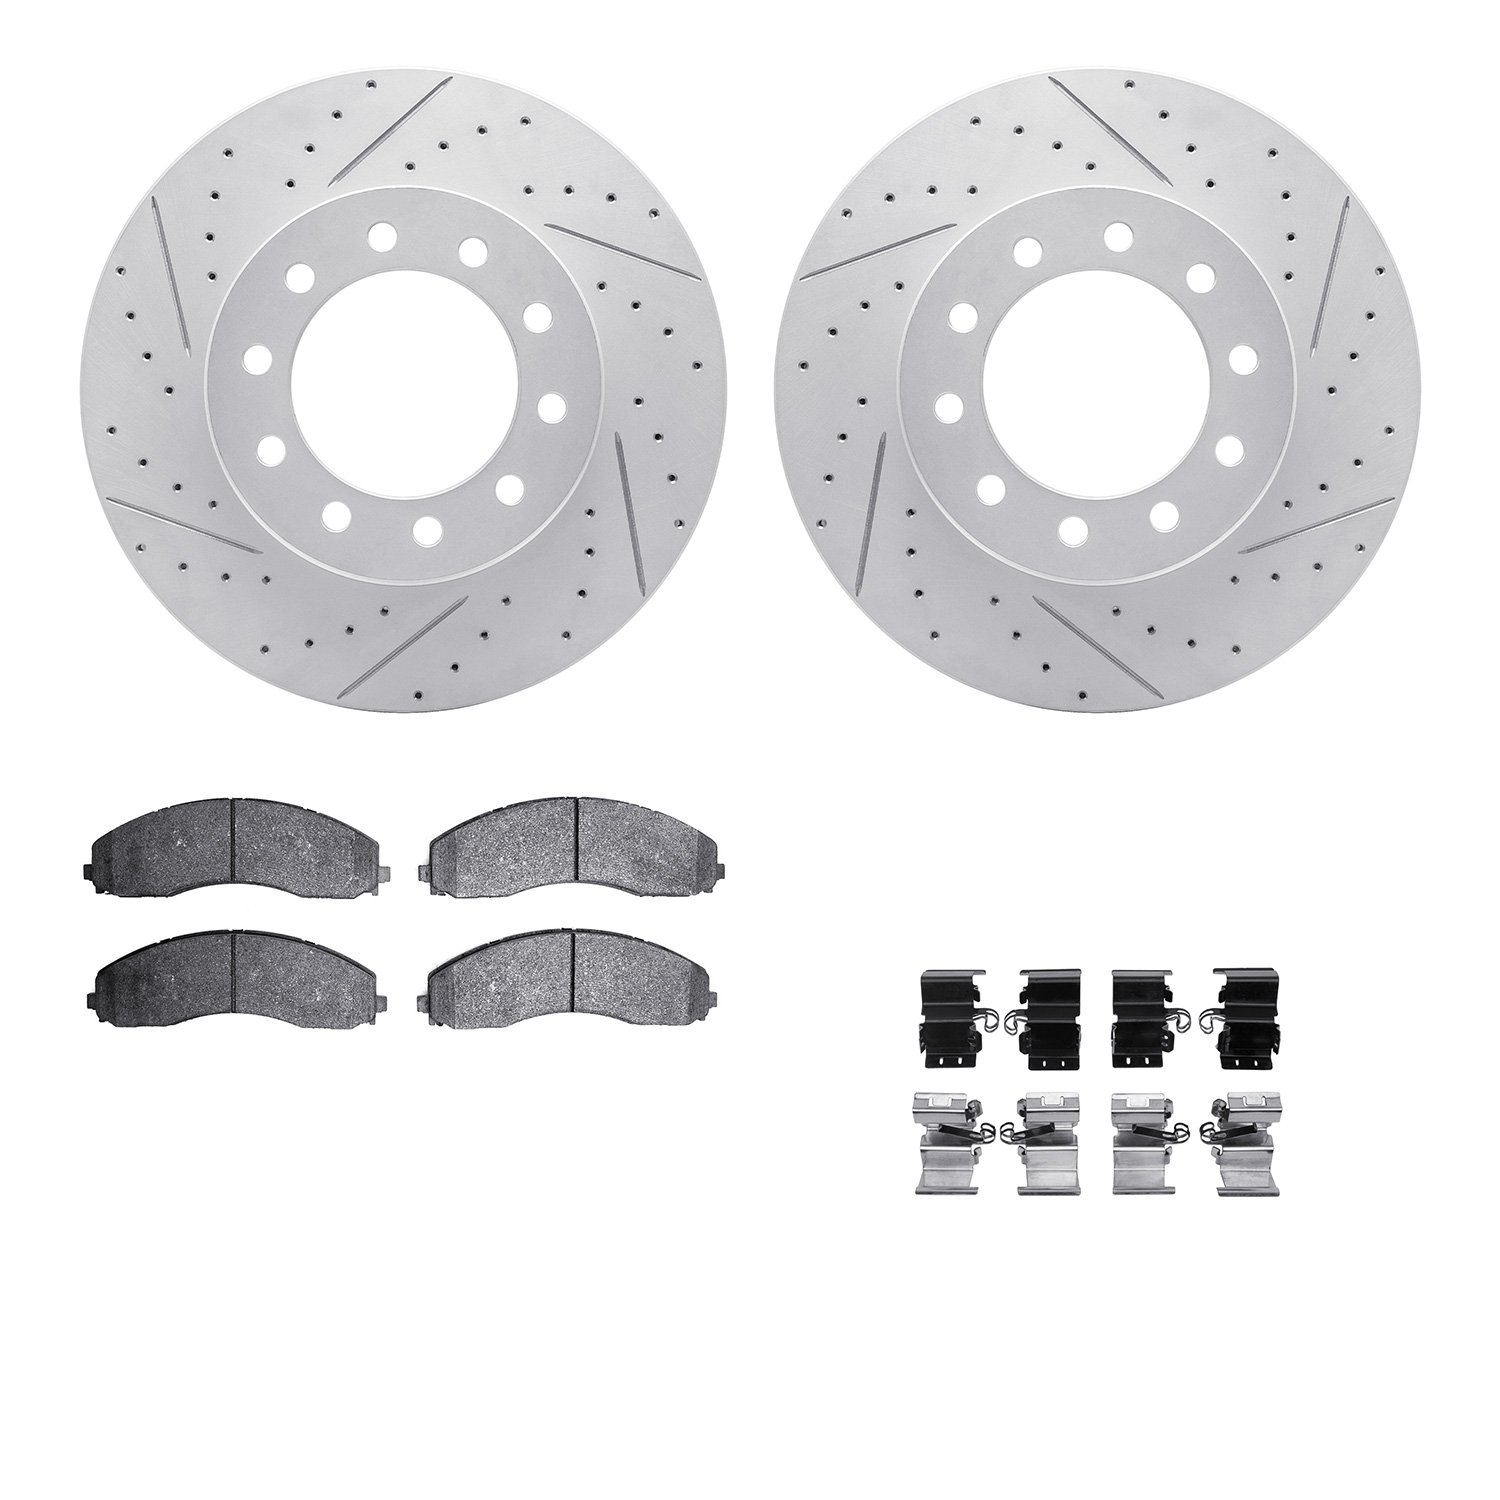 2512-54155 Geoperformance Drilled/Slotted Rotors w/5000 Advanced Brake Pads Kit & Hardware, Fits Select Ford/Lincoln/Mercury/Maz